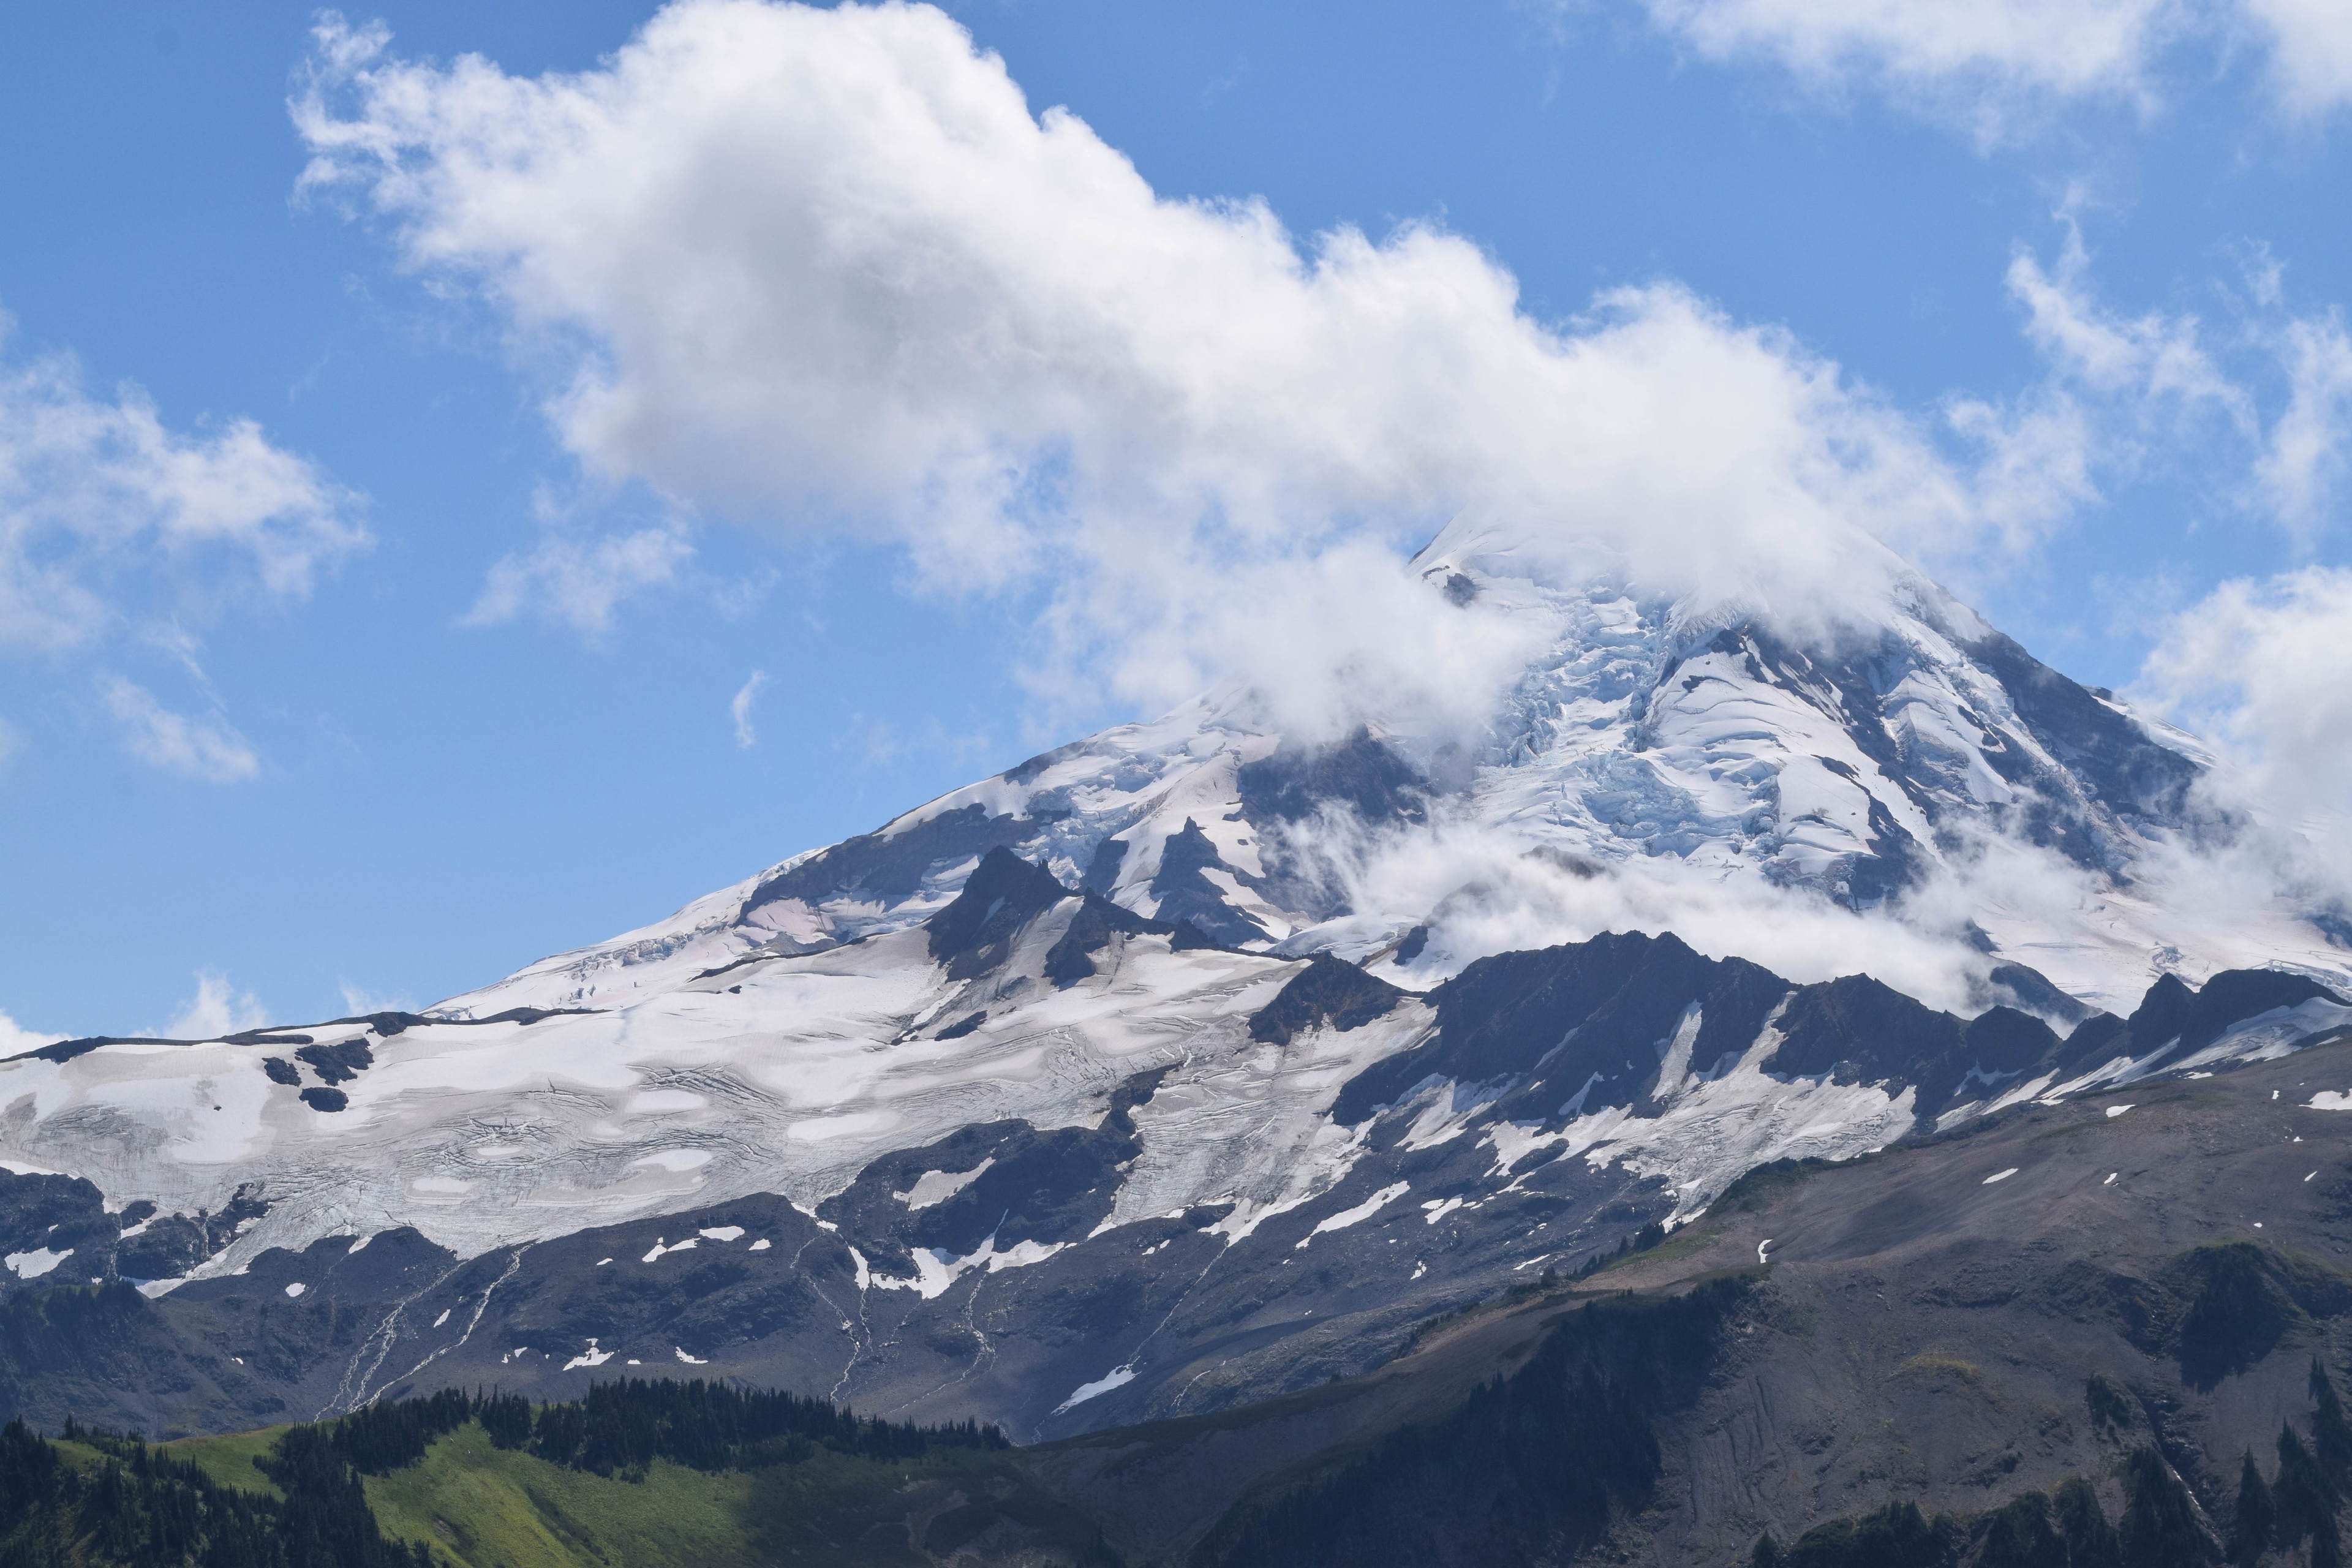 Mount Baker up close and personal! You really have to be quick with your camera, because the clouds move in and block the view quicker than you can dig into your backpack and remove your camera lens!

For more information on visiting Mt. Baker and hiking, check out my blog post: https://culturalfoodies.com/2019/08/31/hiking-in-mount-baker-washington/

#mountbaker
#lifeatexpedia
#mountains
#glacier
#washingtonstate
#pacificnorthwest
#pnw
#travel